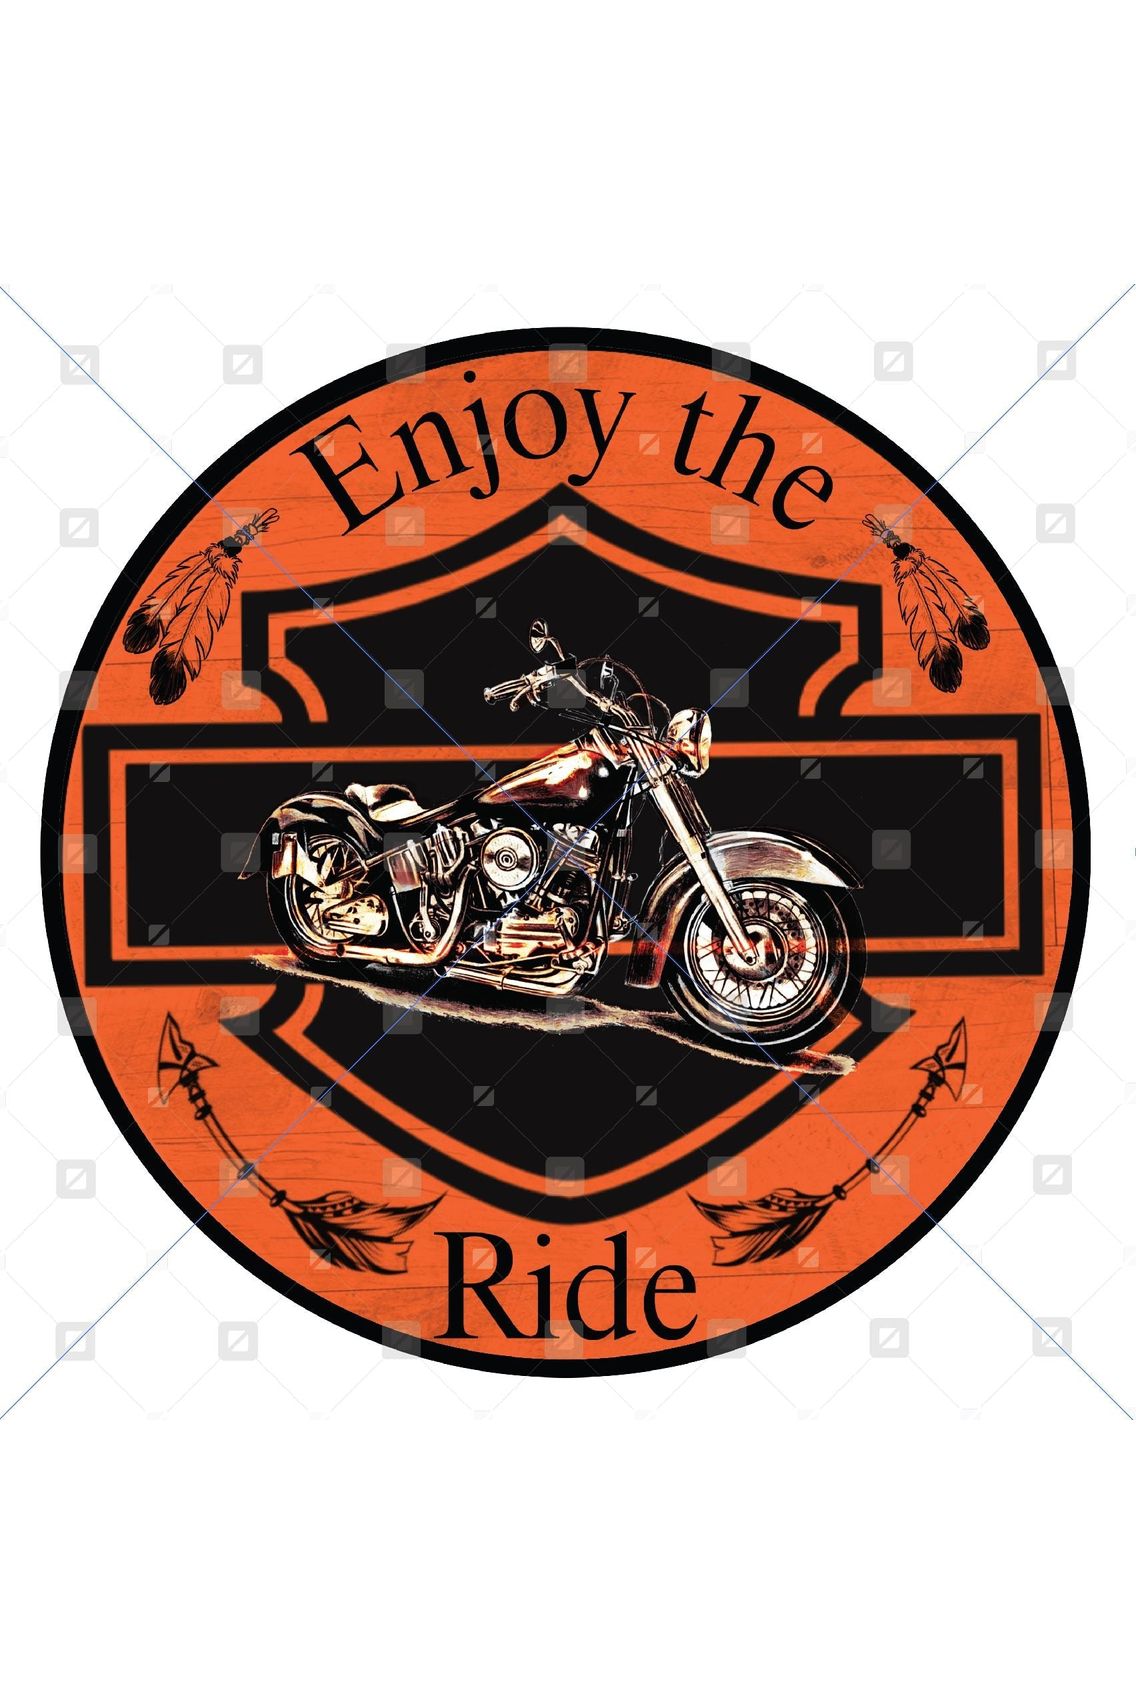 Shop For Motorcycle Enjoy The Ride Sign - Wreath Enhancement